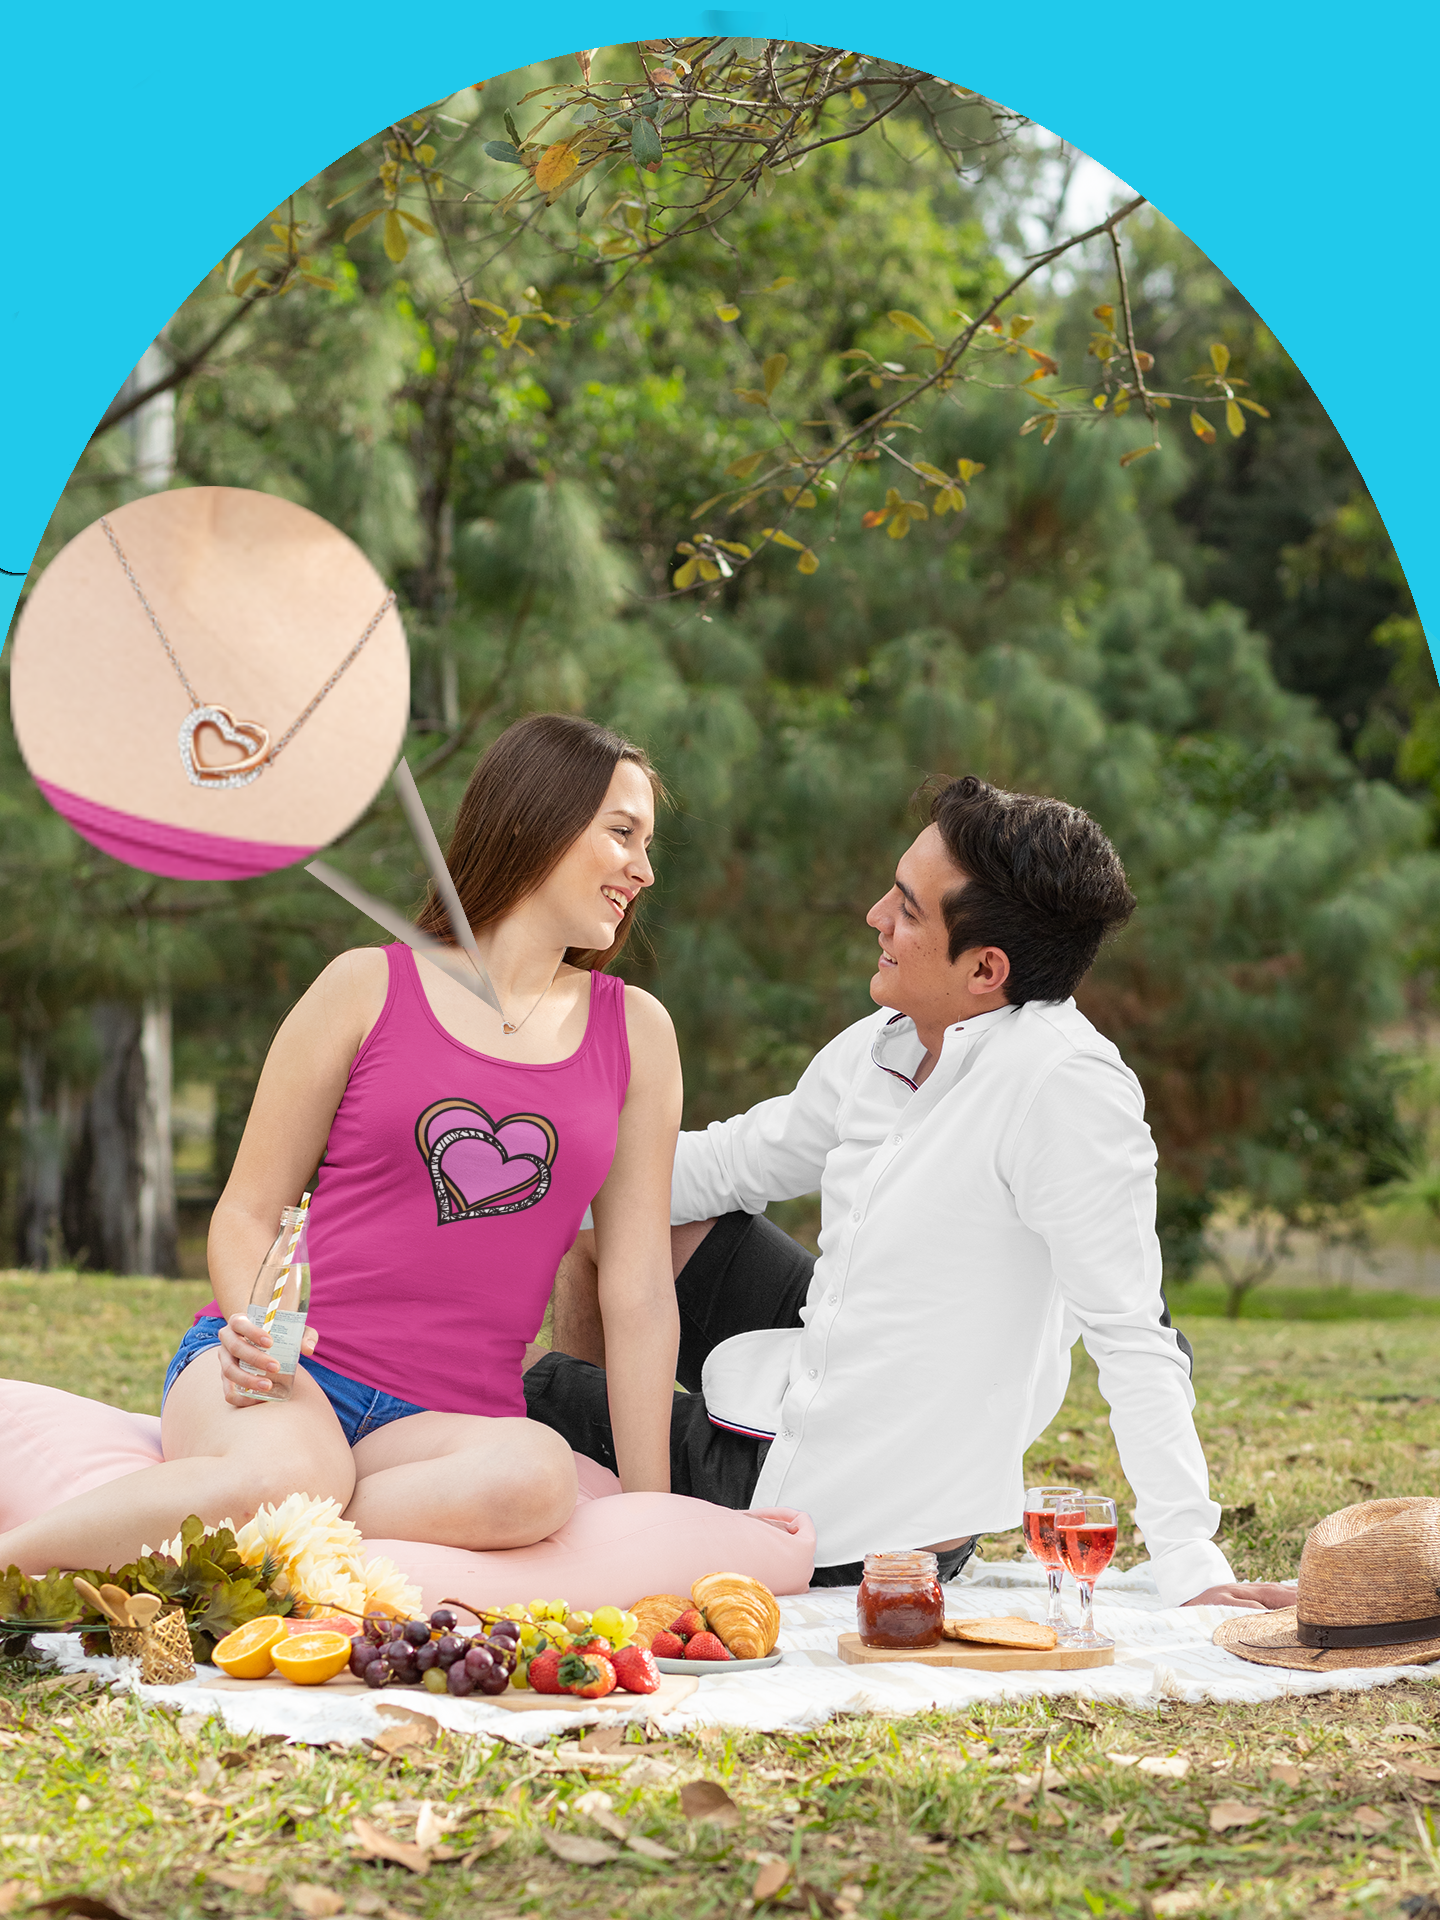 Happy Couple on a Picnic, he gave her the Two Hearts Pendant necklace to show his feeling for her.